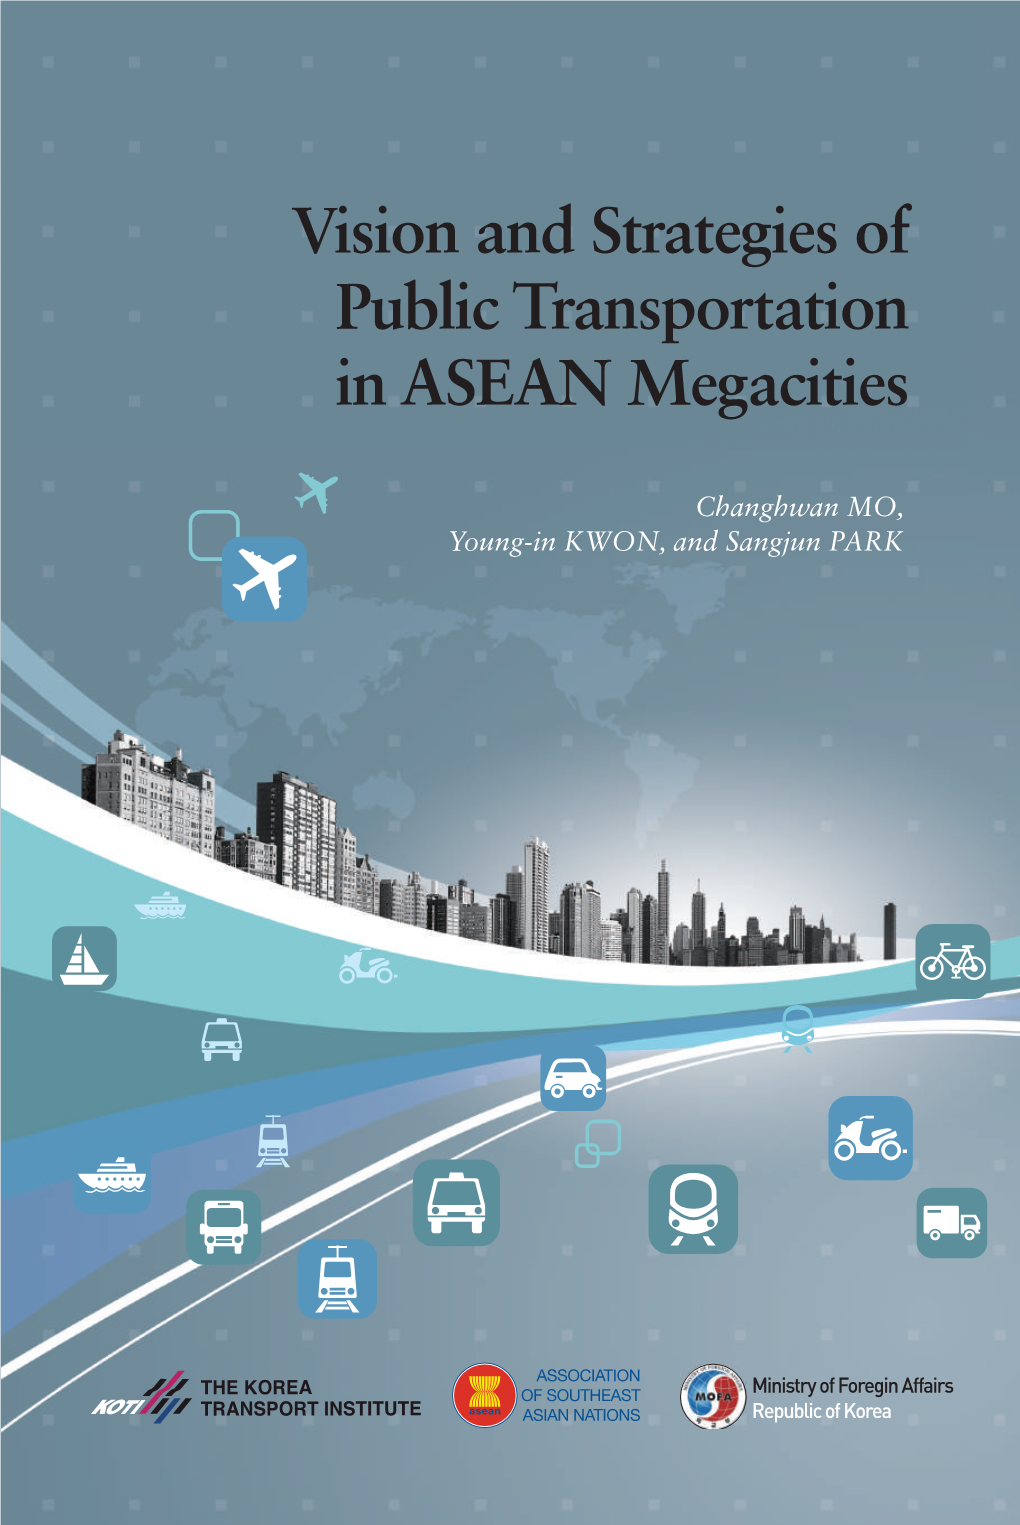 Vision and Strategies of Public Transportation in ASEAN Megacities